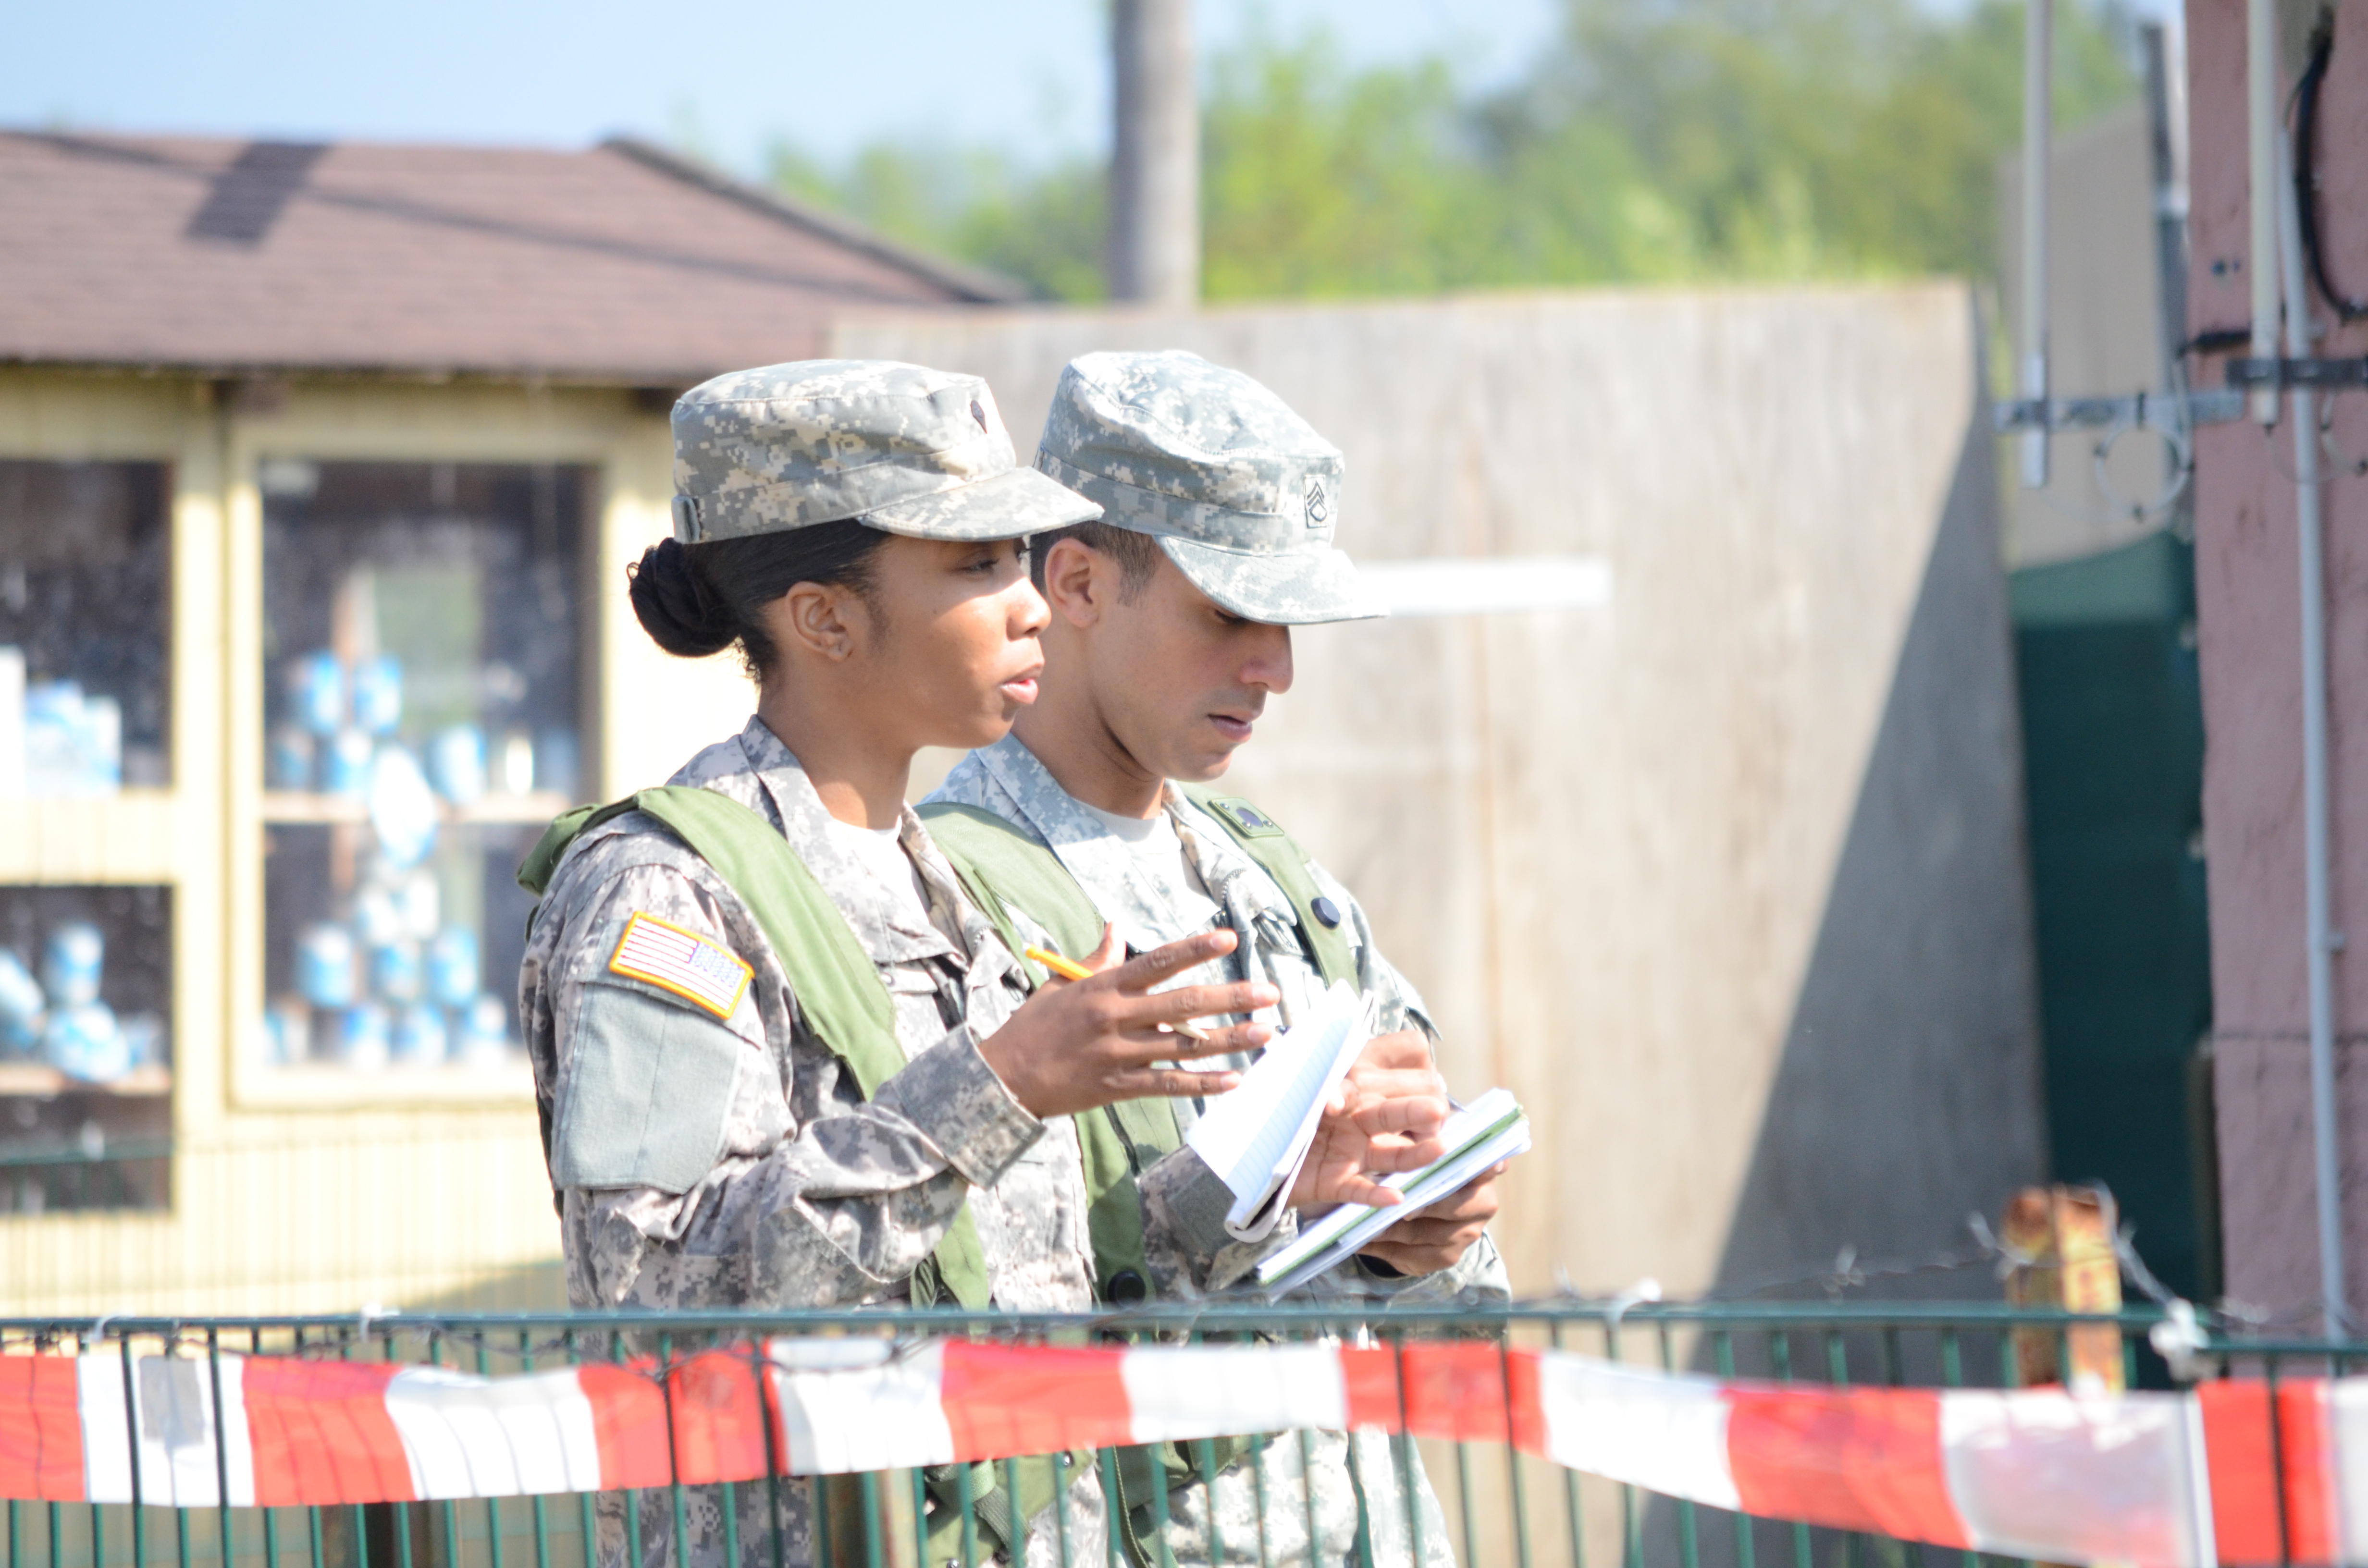 File:From left, U.S. Army Spc. Ayanno Davis and Staff Sgt. Hector